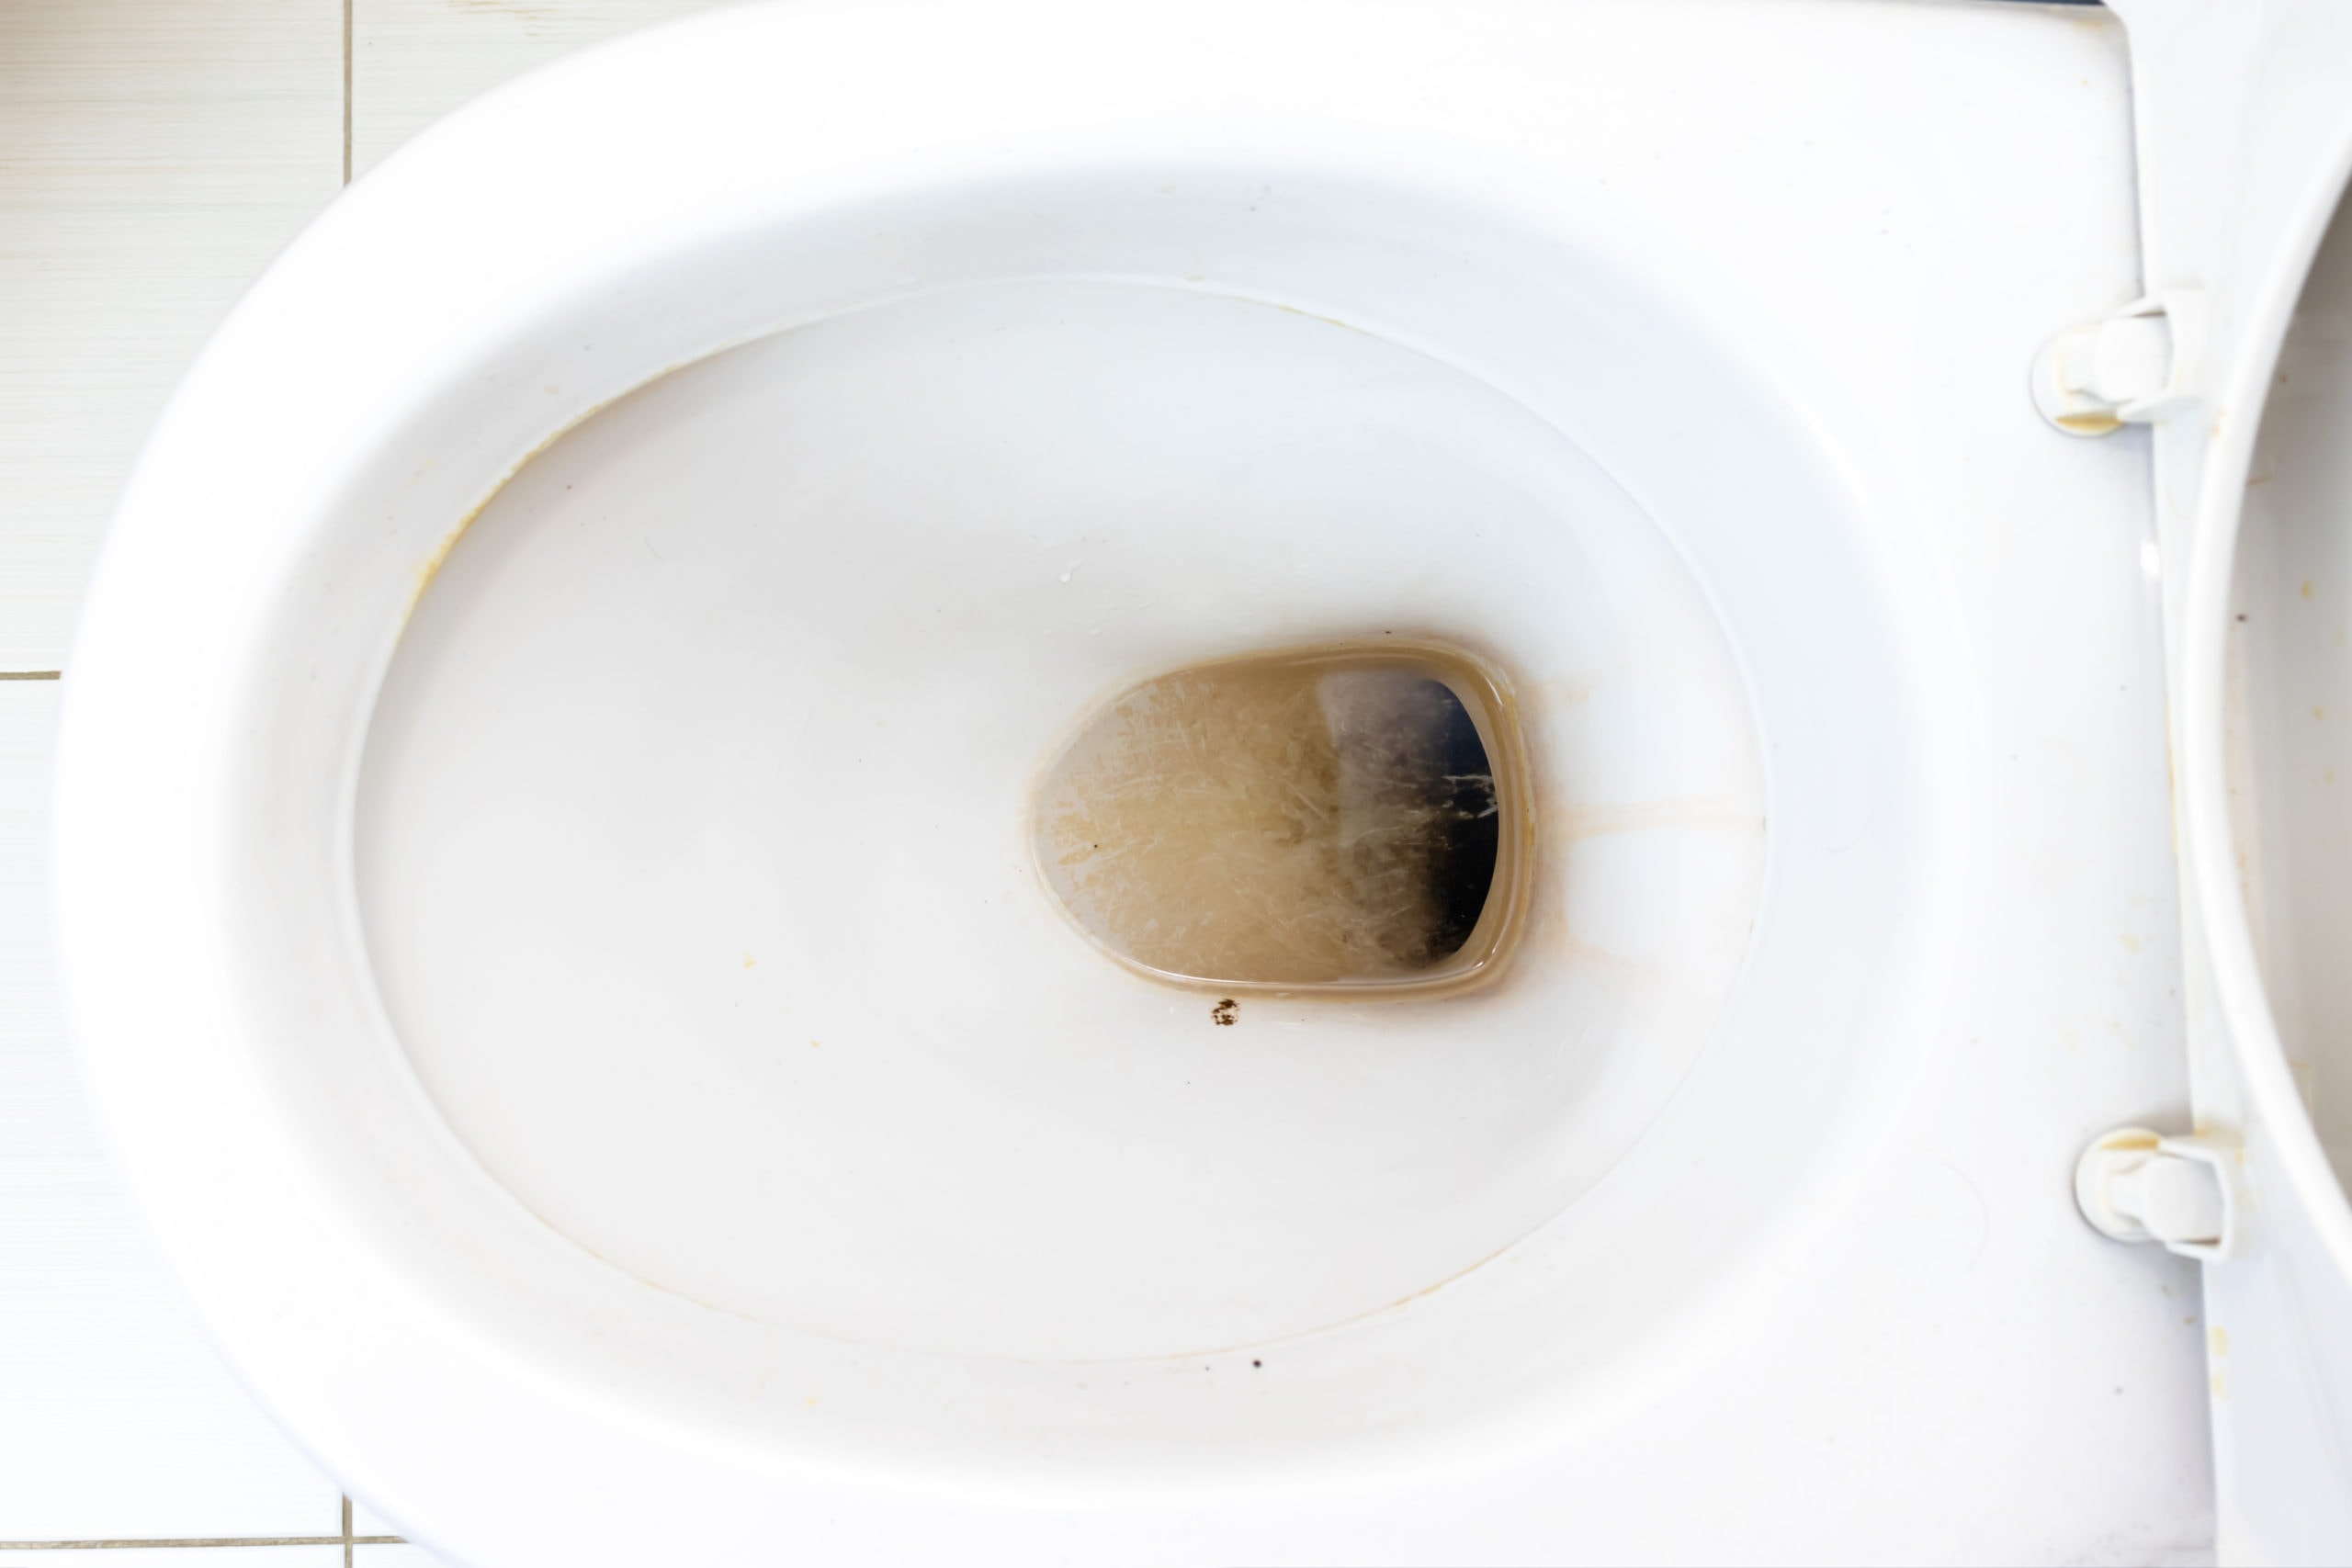 Dirty unhygienic toilet bowl with limescale stain.